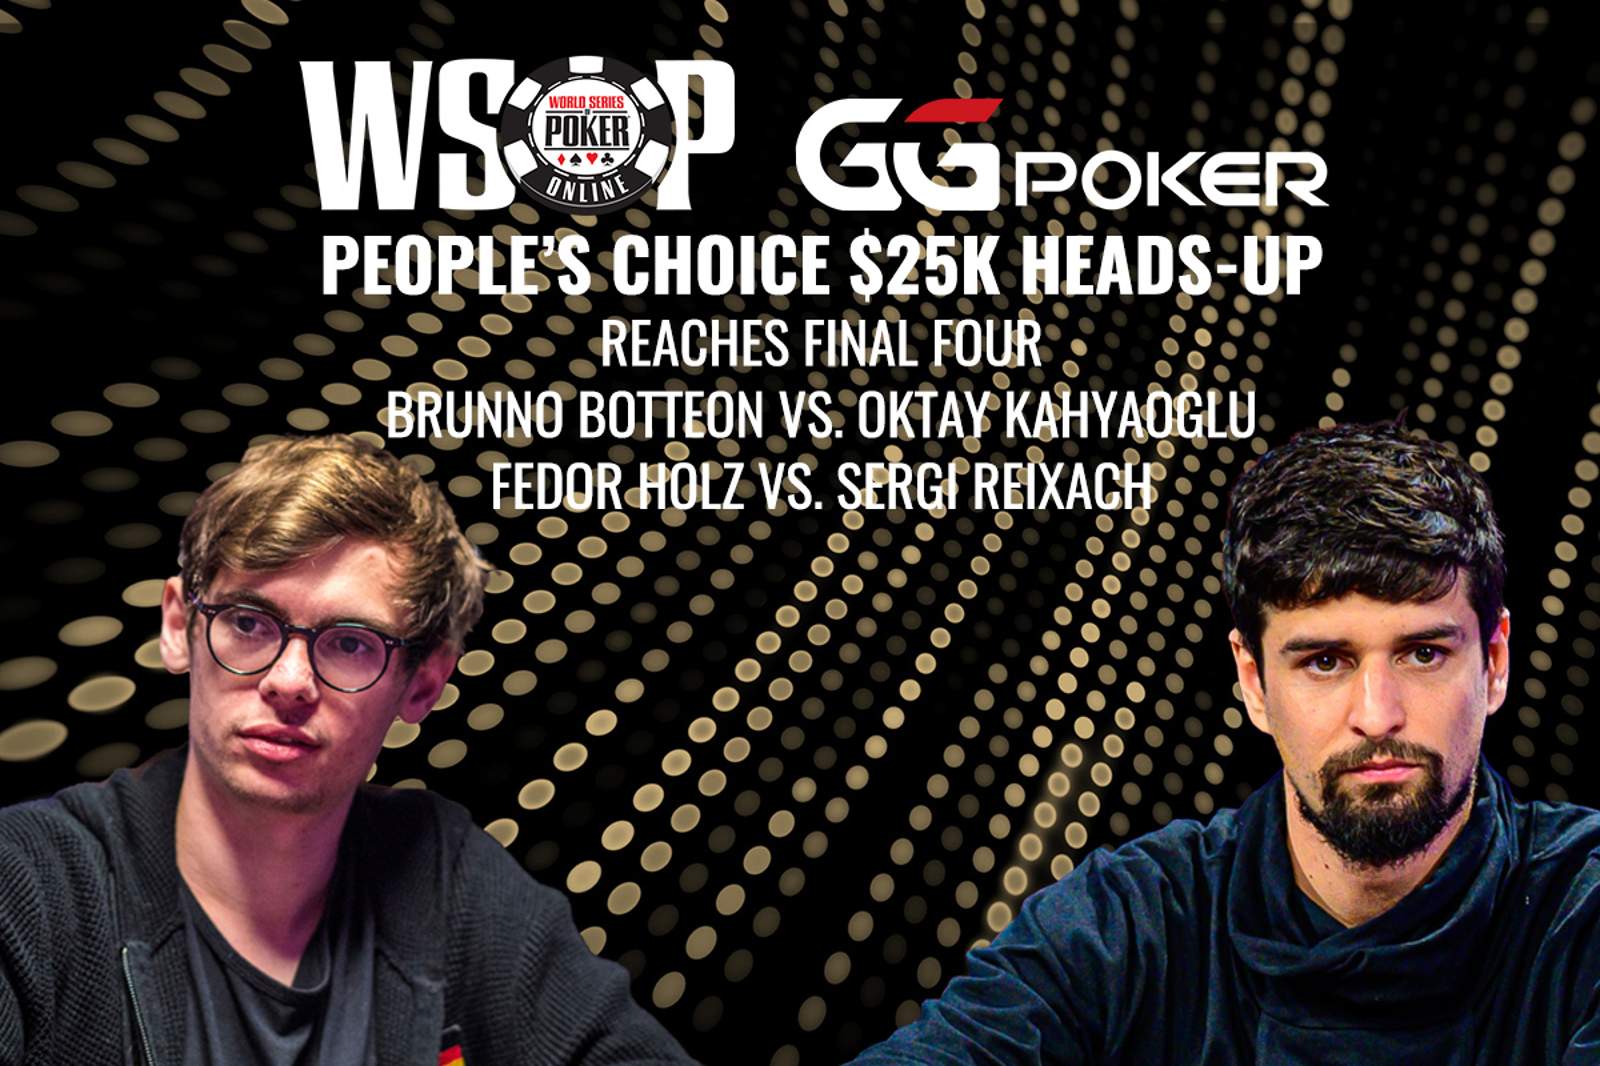 Final Four Reached in GGPoker WSOP Online People's Choice $25,000 Heads-Up - Continues Sunday, September 6